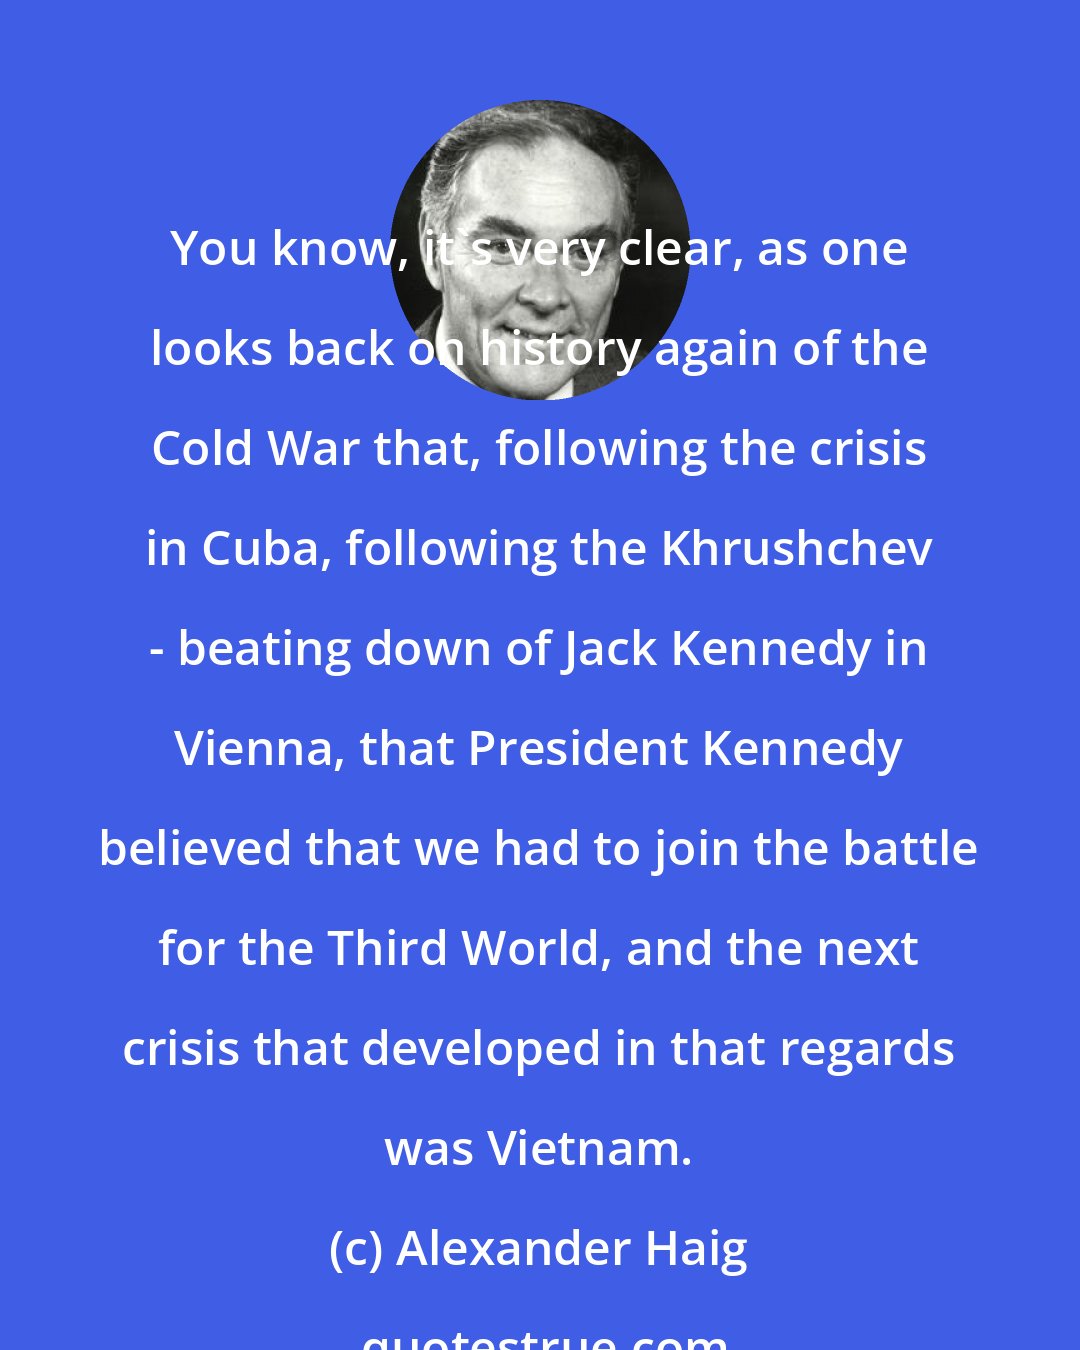 Alexander Haig: You know, it's very clear, as one looks back on history again of the Cold War that, following the crisis in Cuba, following the Khrushchev - beating down of Jack Kennedy in Vienna, that President Kennedy believed that we had to join the battle for the Third World, and the next crisis that developed in that regards was Vietnam.